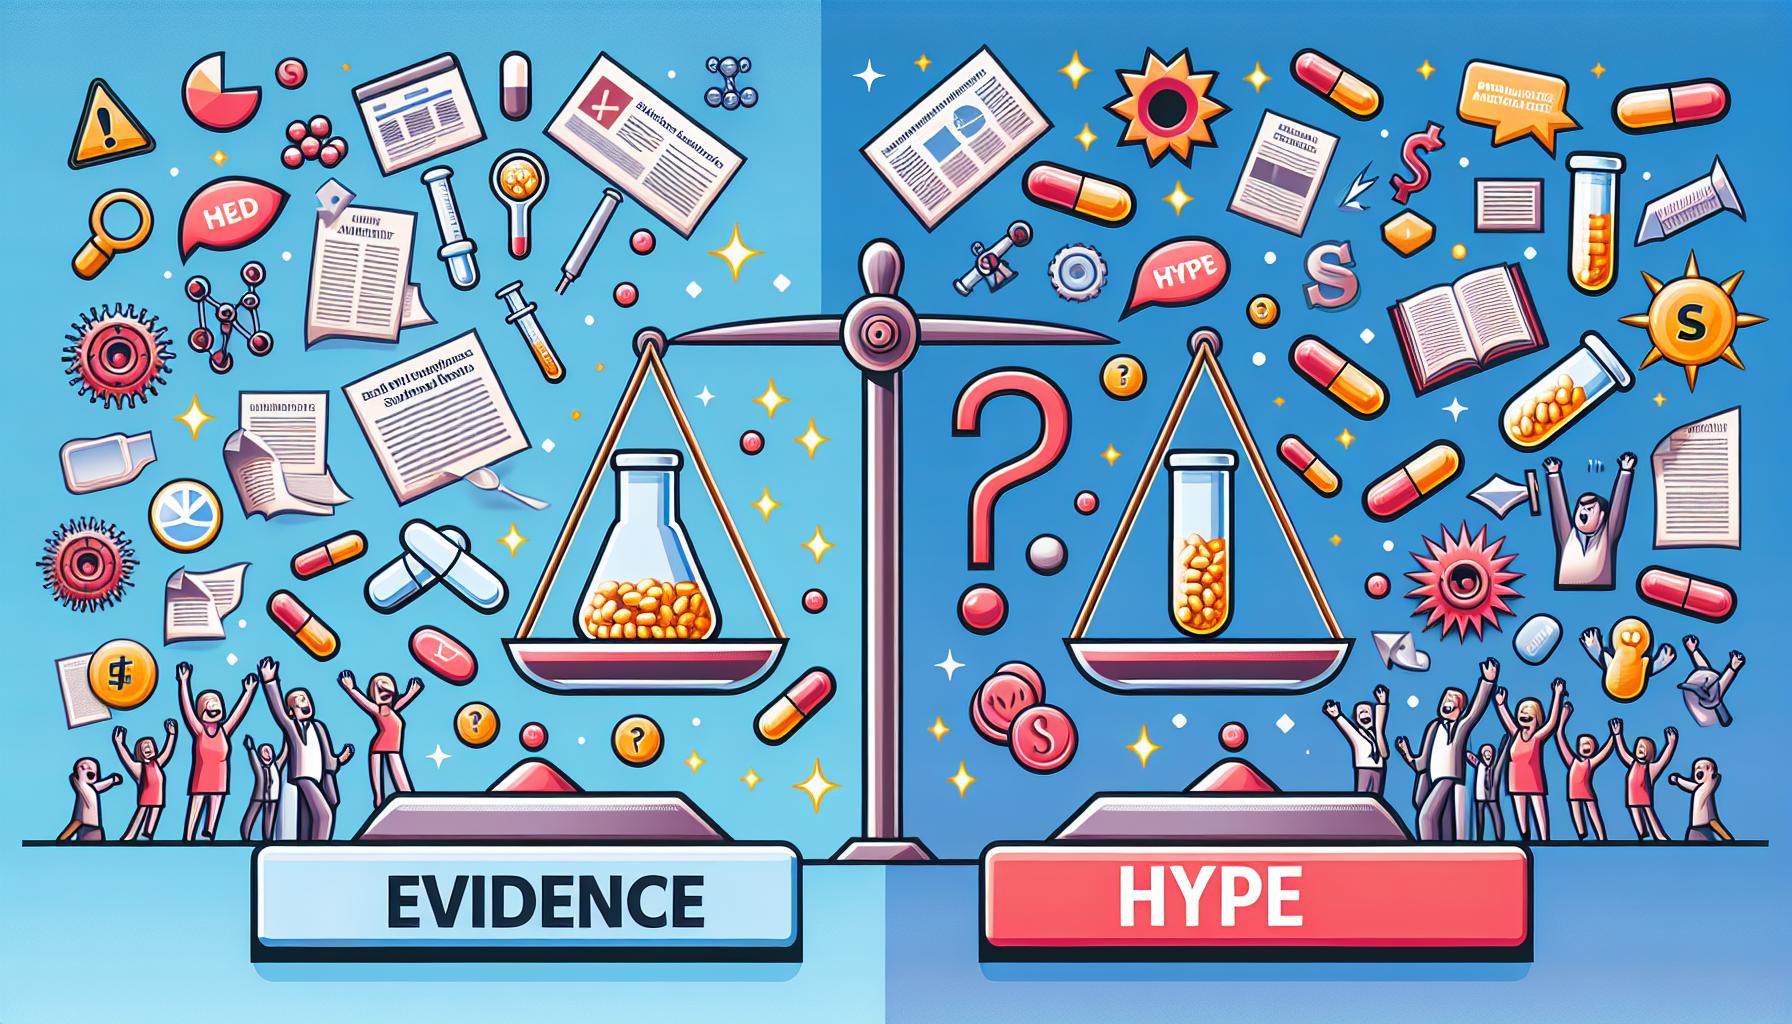 Efficiency of CoQ10 Supplements: Evidence vs Hype